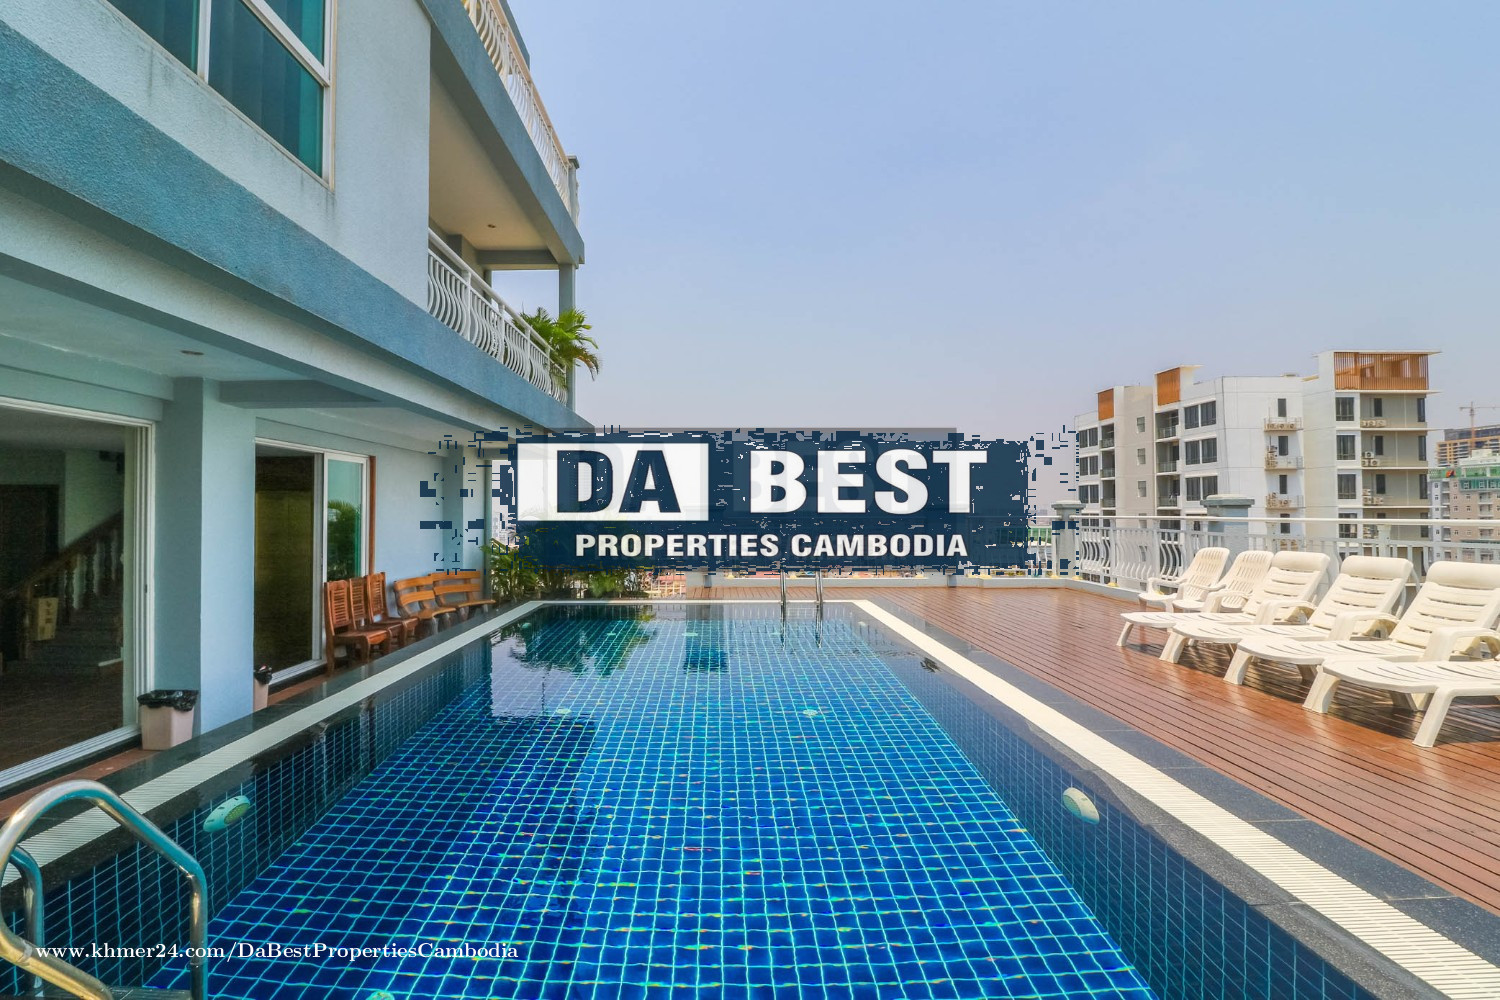 DABEST PROPERTIES: 1 Bedroom Apartment for Rent with Gym, Swimming pool in Phnom Penh-BKK3